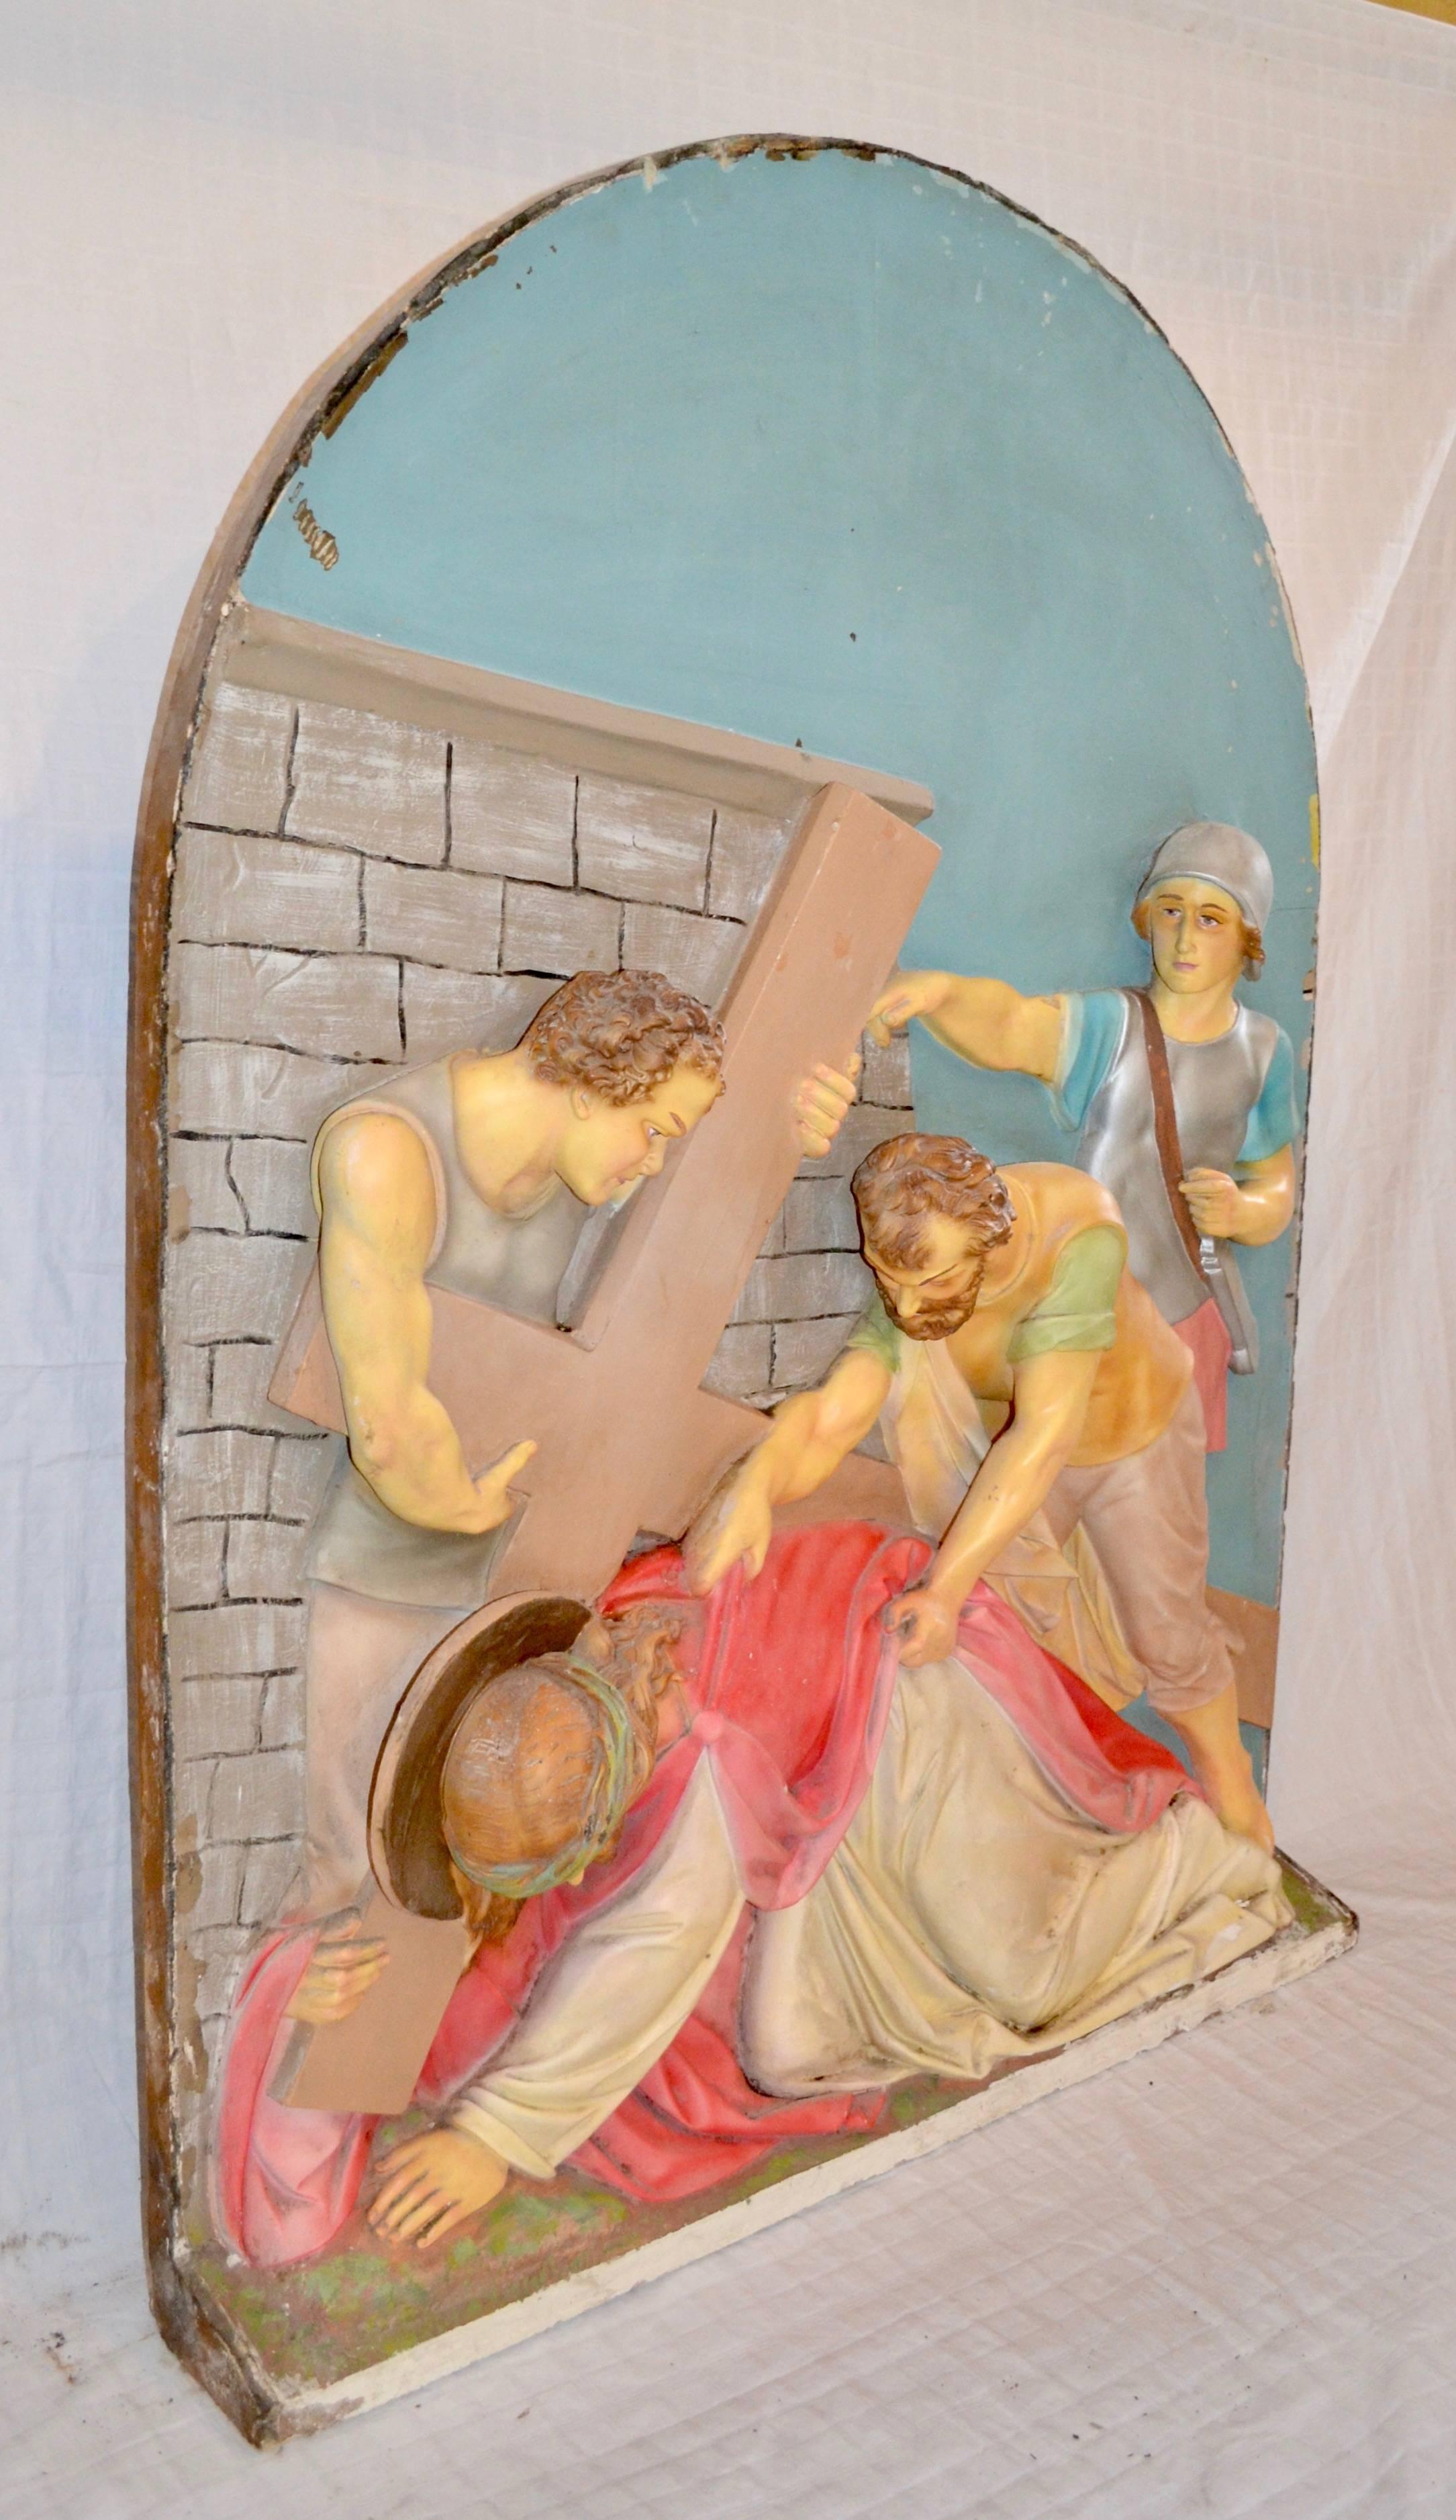 These unusual stations of the Cross are possible De Prado Studios. The panels are in good condition with some minor losses. The vibrant colors are consistent with and characteristic of a midcentury repaint. The panel shown is one of eight remaining